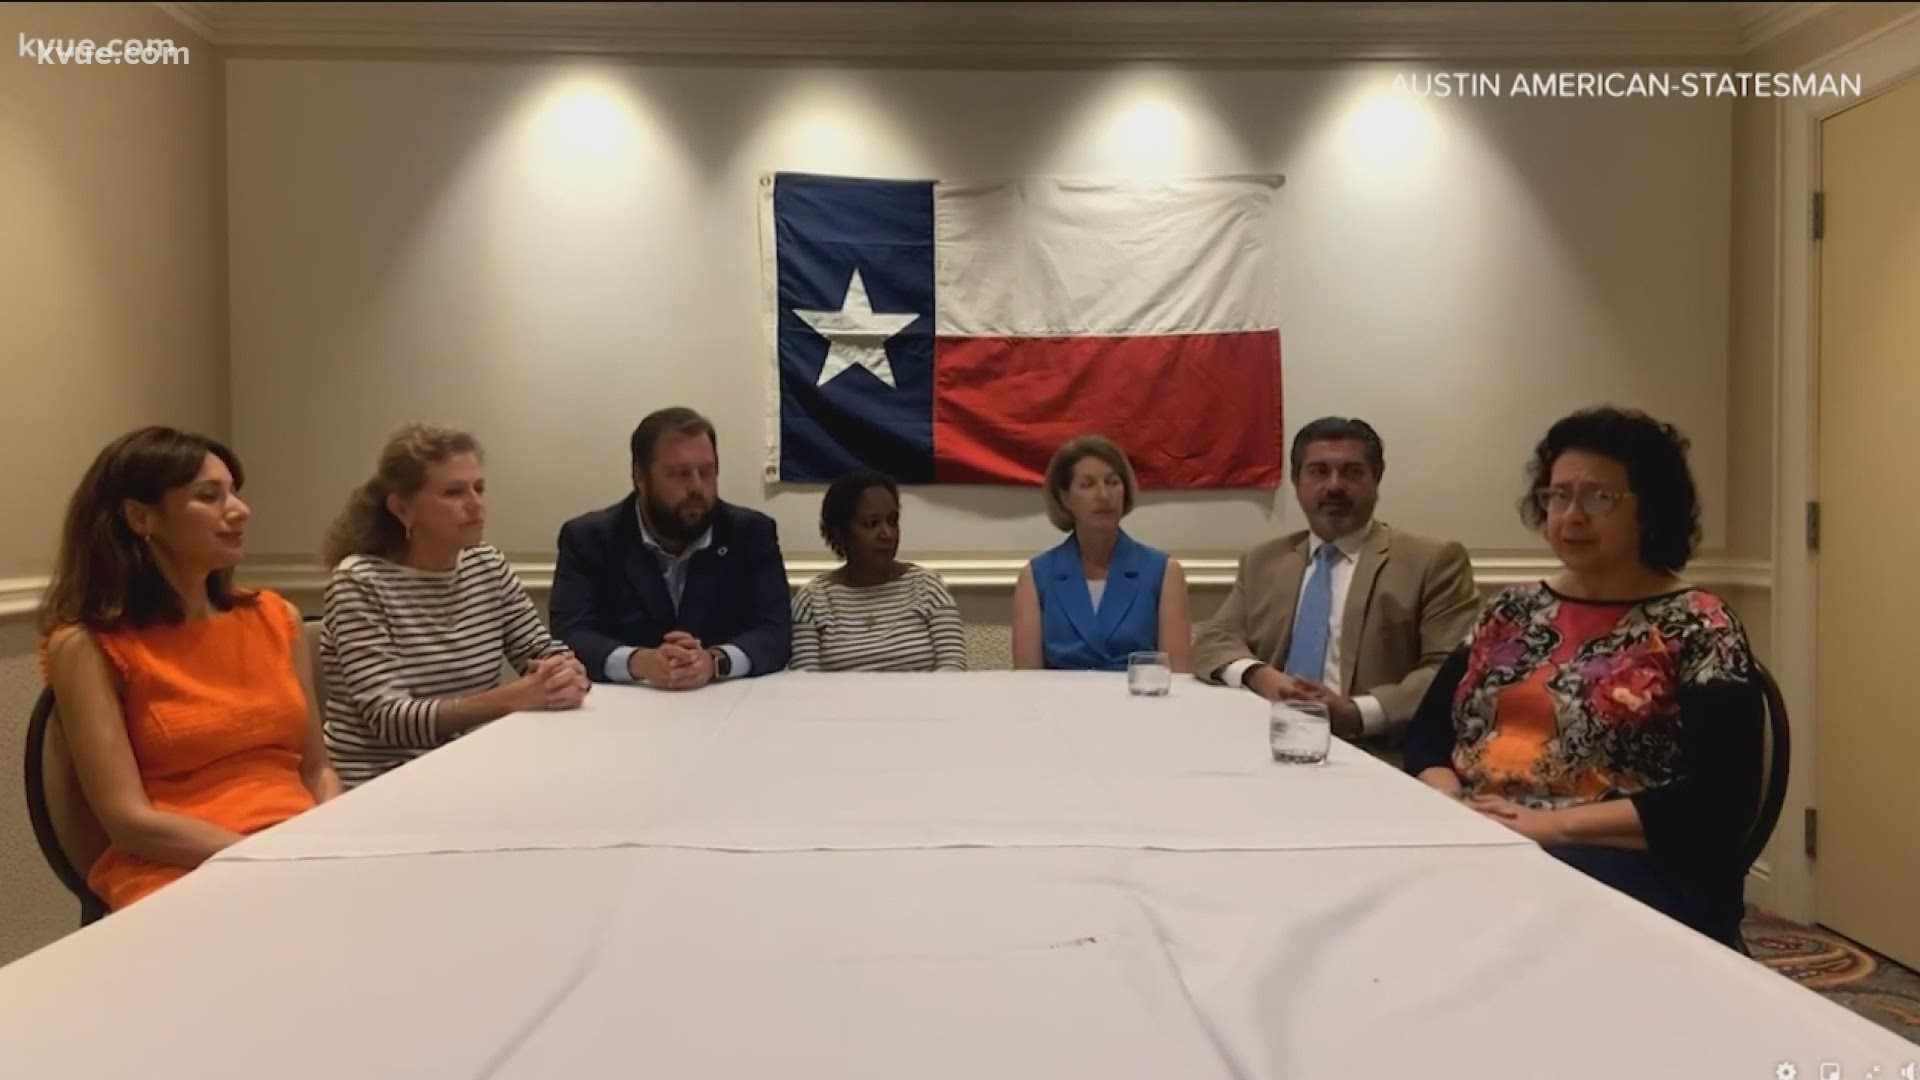 The lawmakers spoke about their ongoing fight against voting legislation in Texas. Meanwhile, six have tested positive for COVID-19.